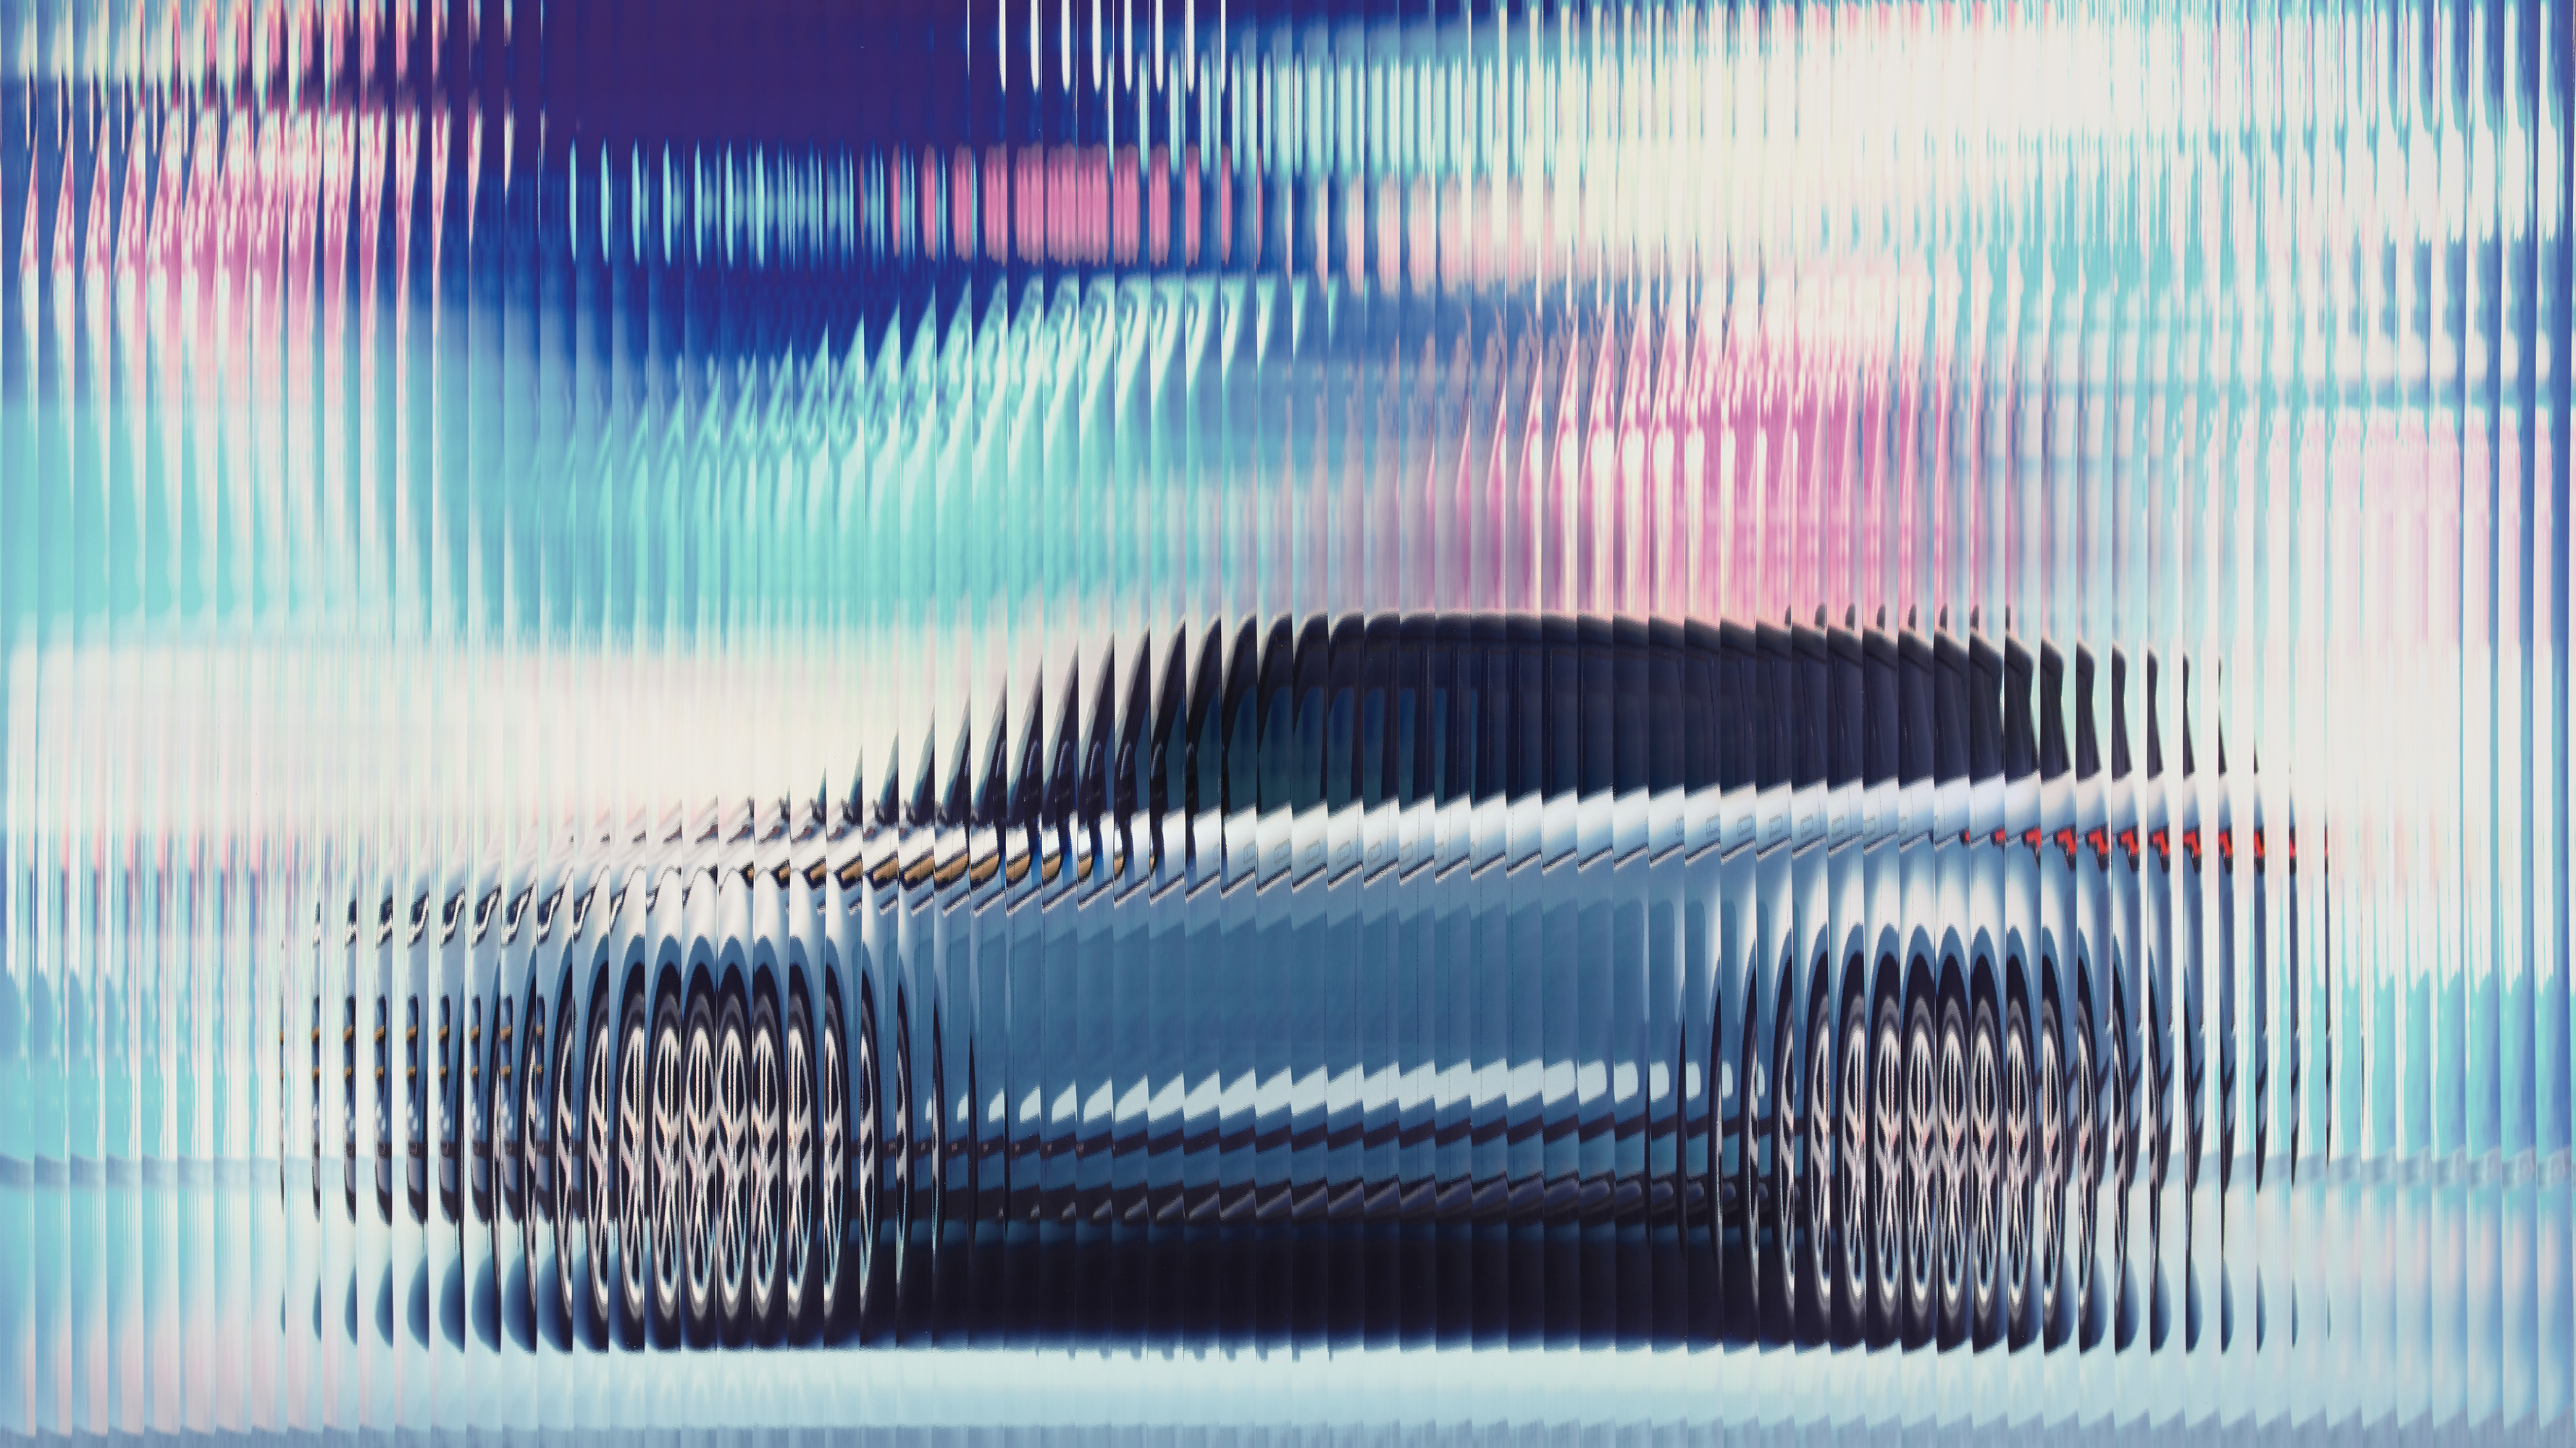 Spark44 Distorts Design in Abstract Range Rover Teaser Film